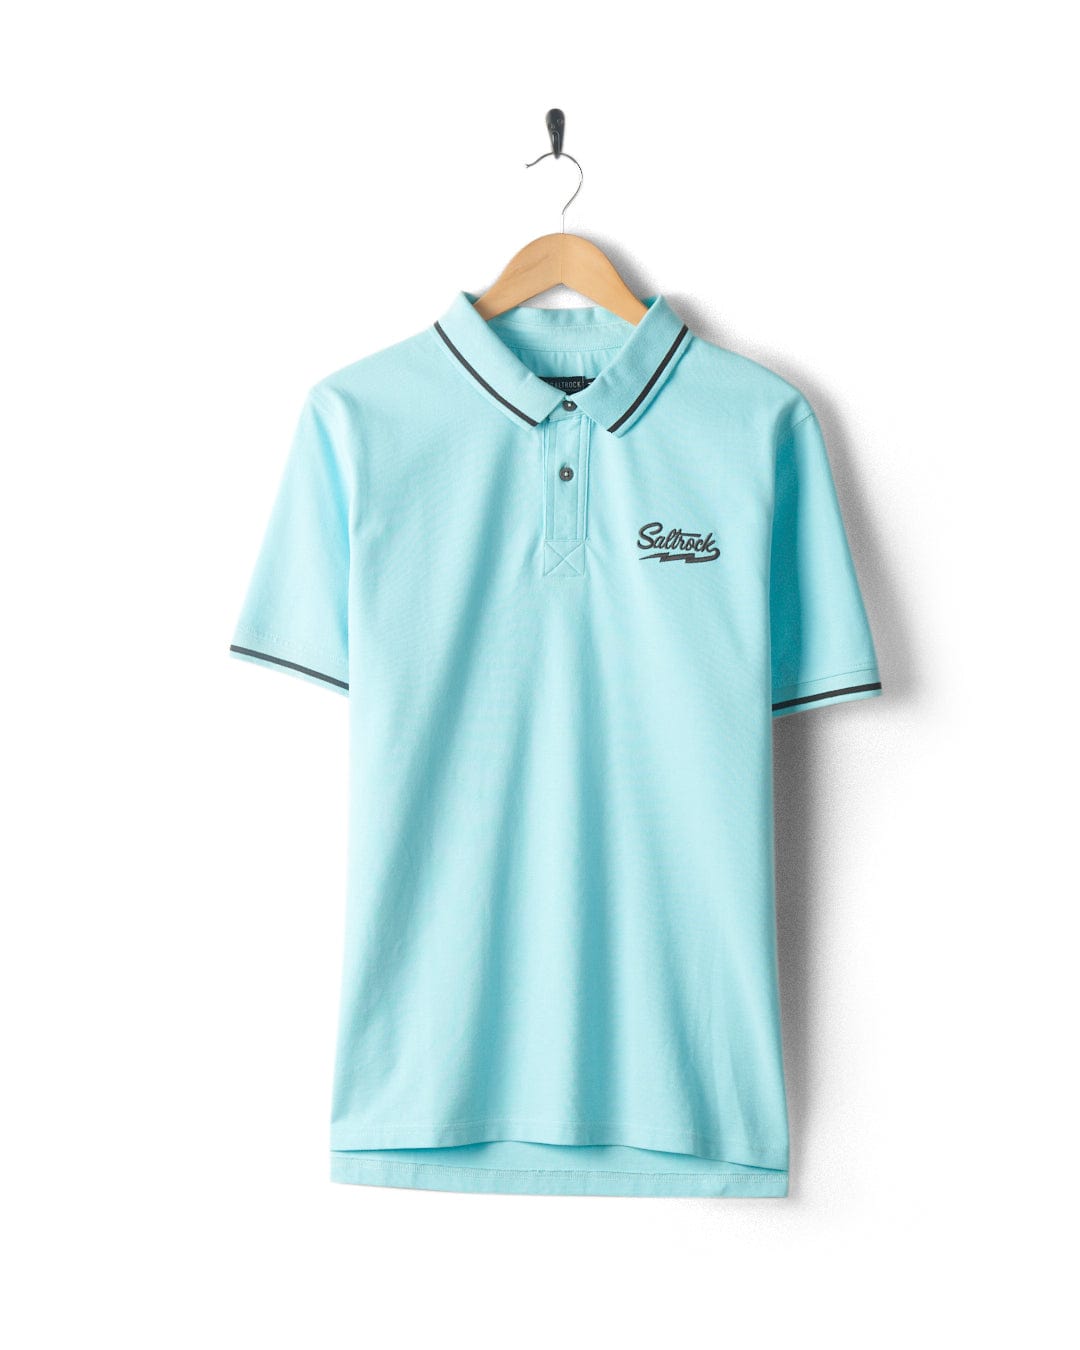 Strike Logo - Mens Short Sleeve Polo Shirt - Light Blue by Saltrock with short sleeves, a collar, and three buttons, hanging on a wooden hanger. It has a small embroidered logo on the left chest.